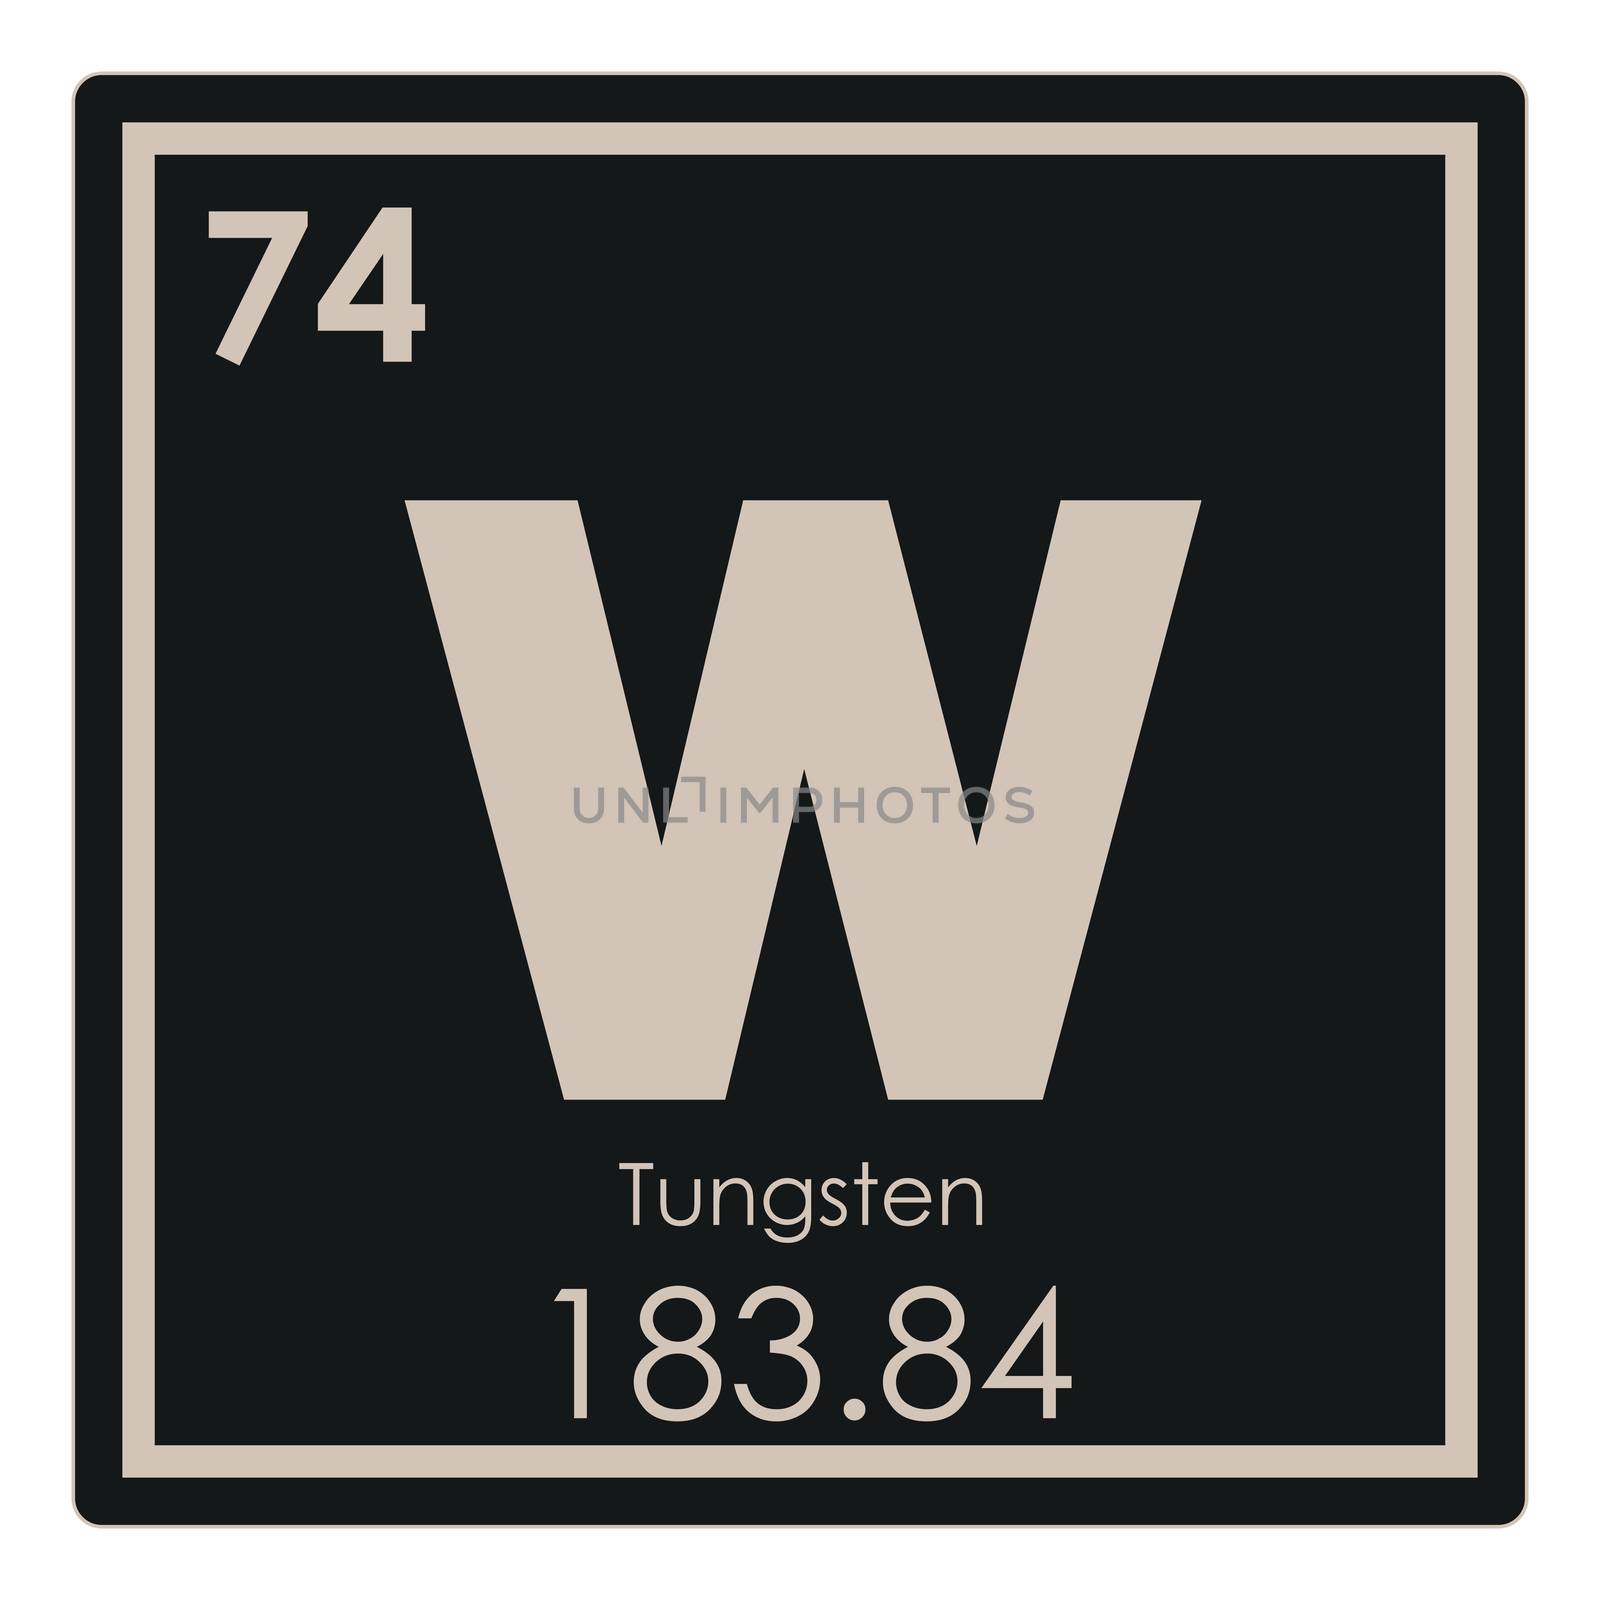 Tungsten chemical element by tony4urban